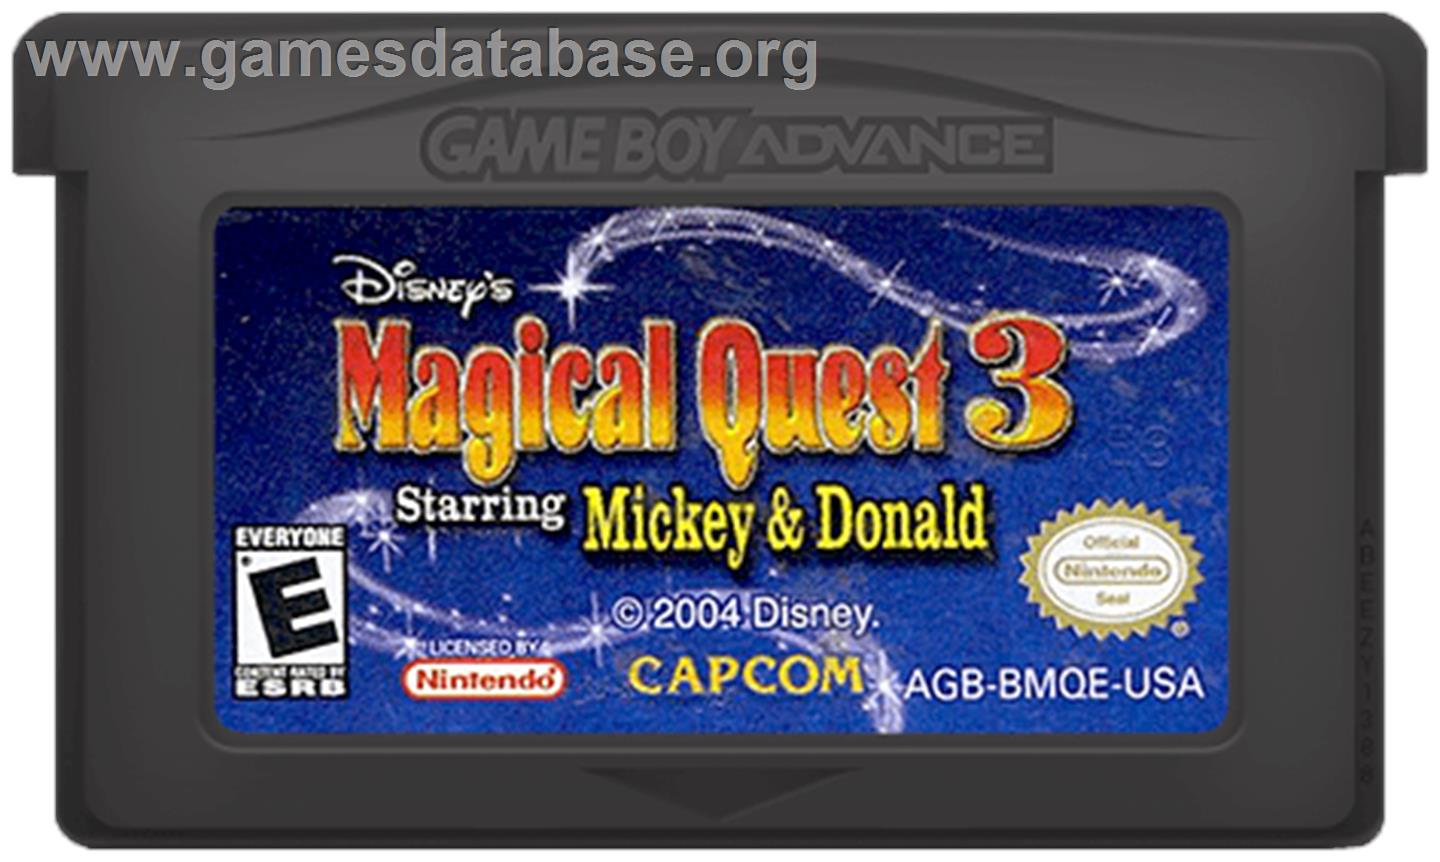 Magical Quest 3 starring Mickey and Donald - Nintendo Game Boy Advance - Artwork - Cartridge